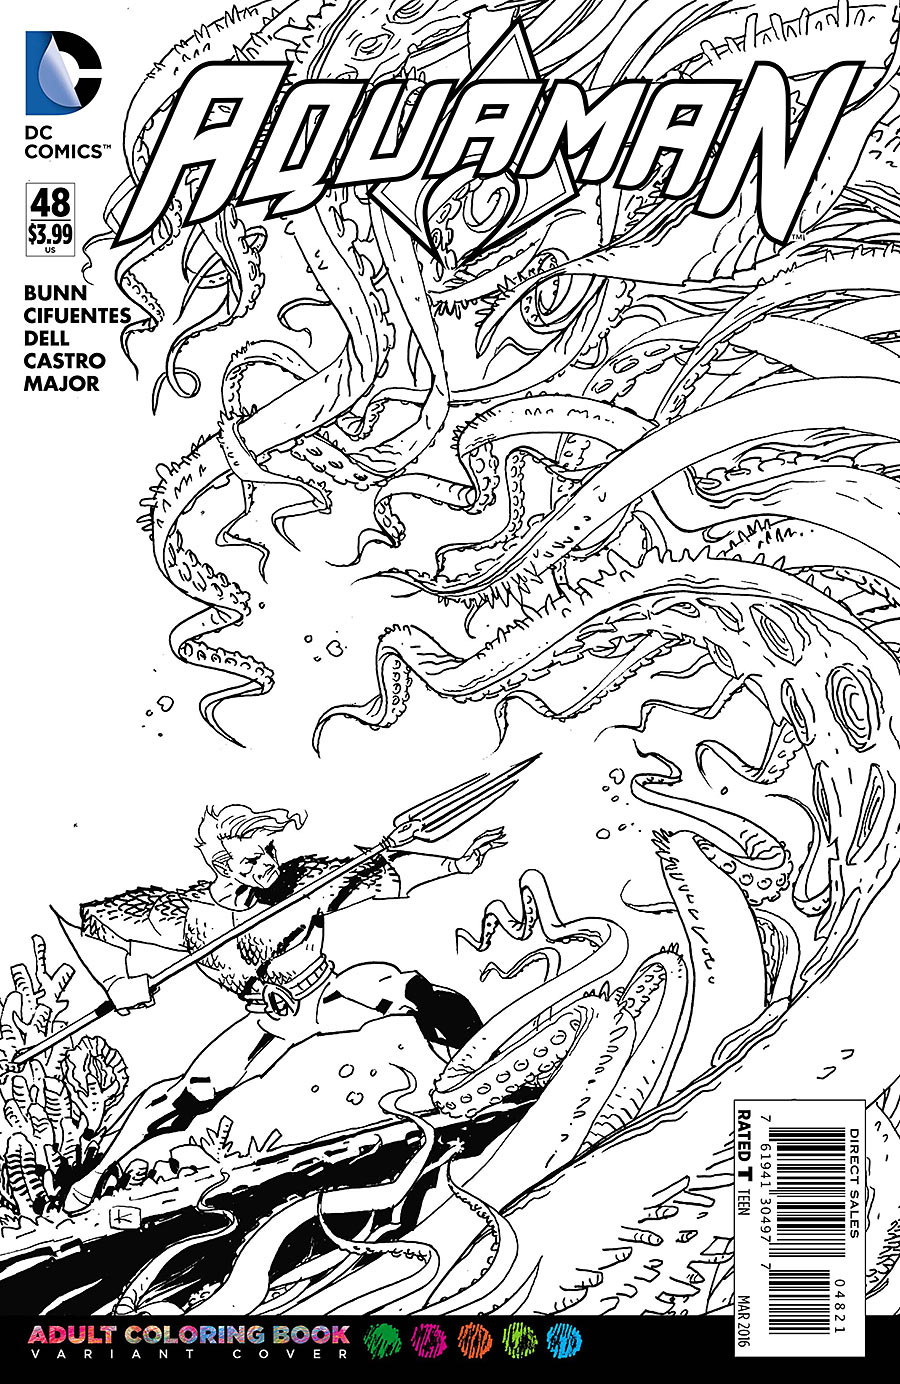 Download Image - Aquaman Vol 7 48 Coloring Book Variant.jpg | DC Database | FANDOM powered by Wikia